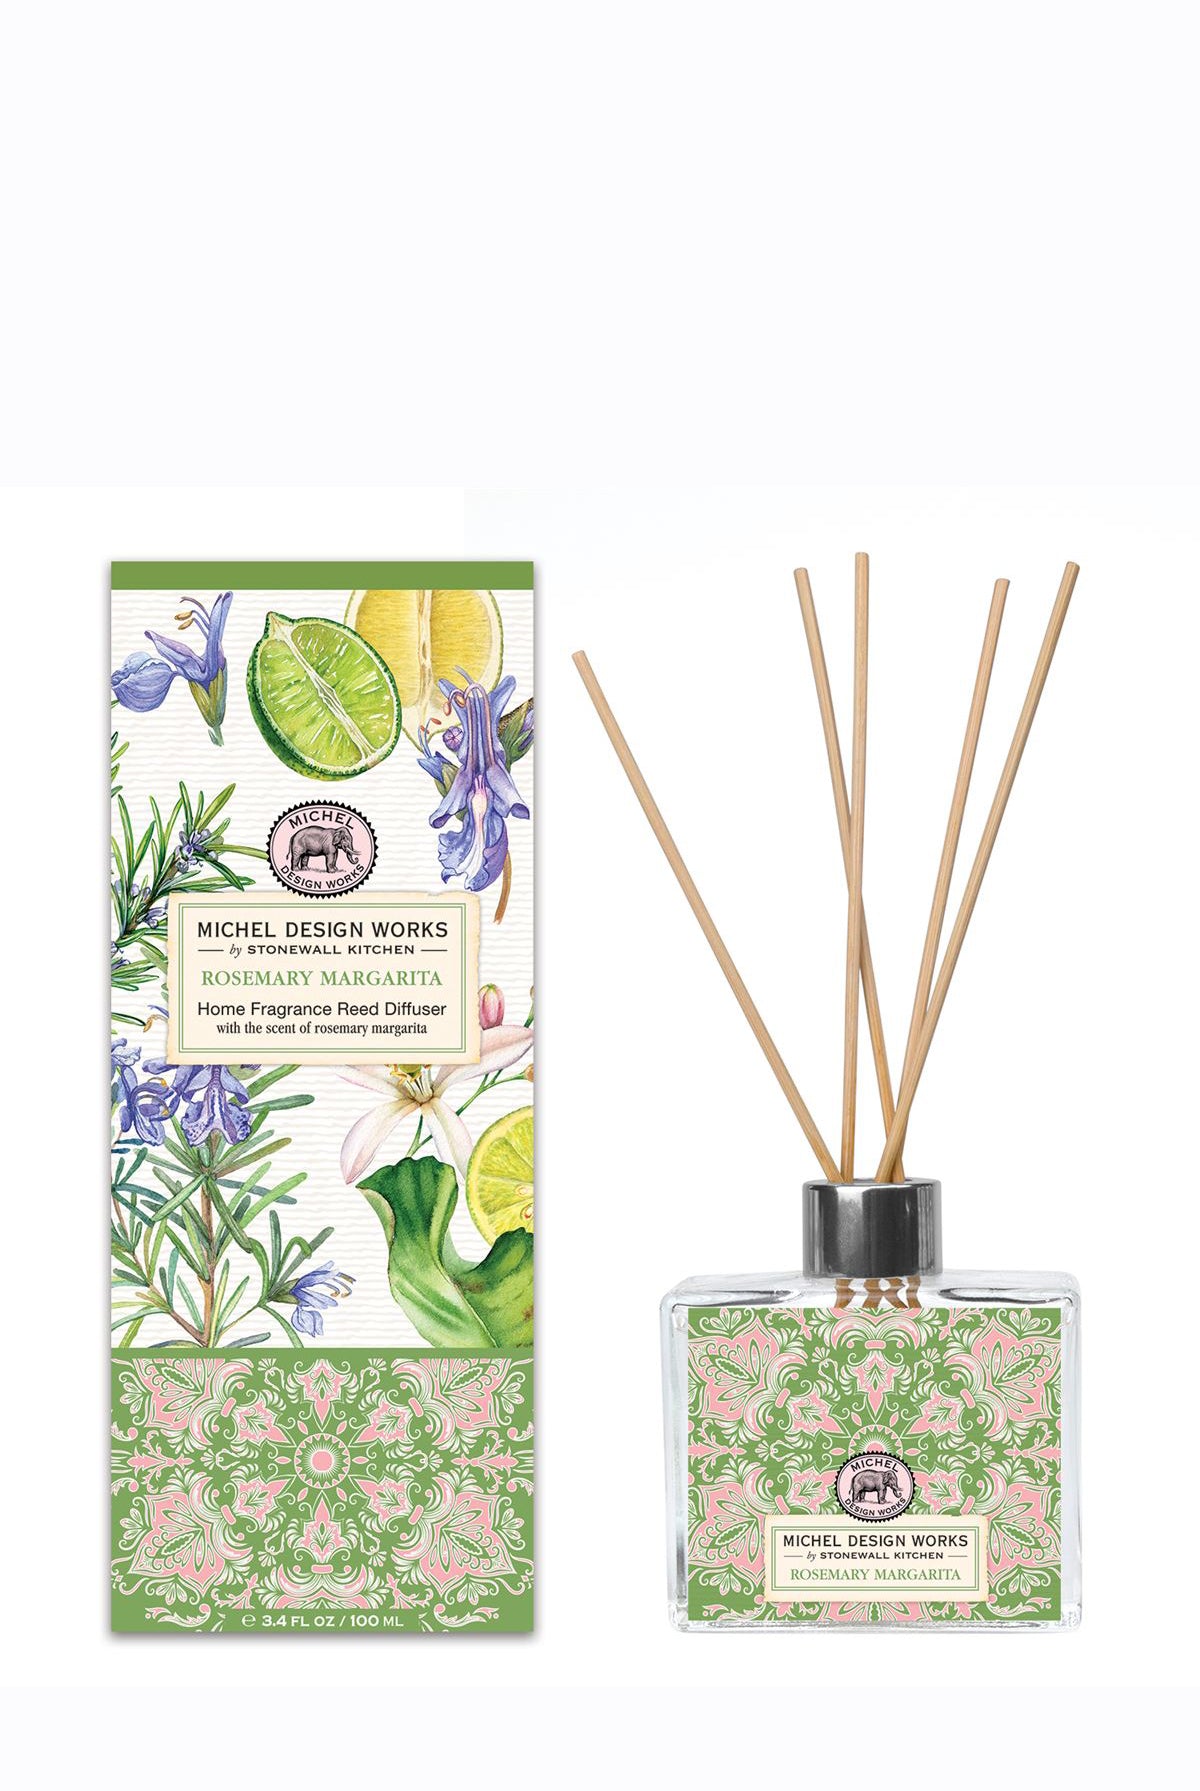 MICHEL DESIGN WORKS Rosemary Margarita Reed Diffuser - Magpie Style